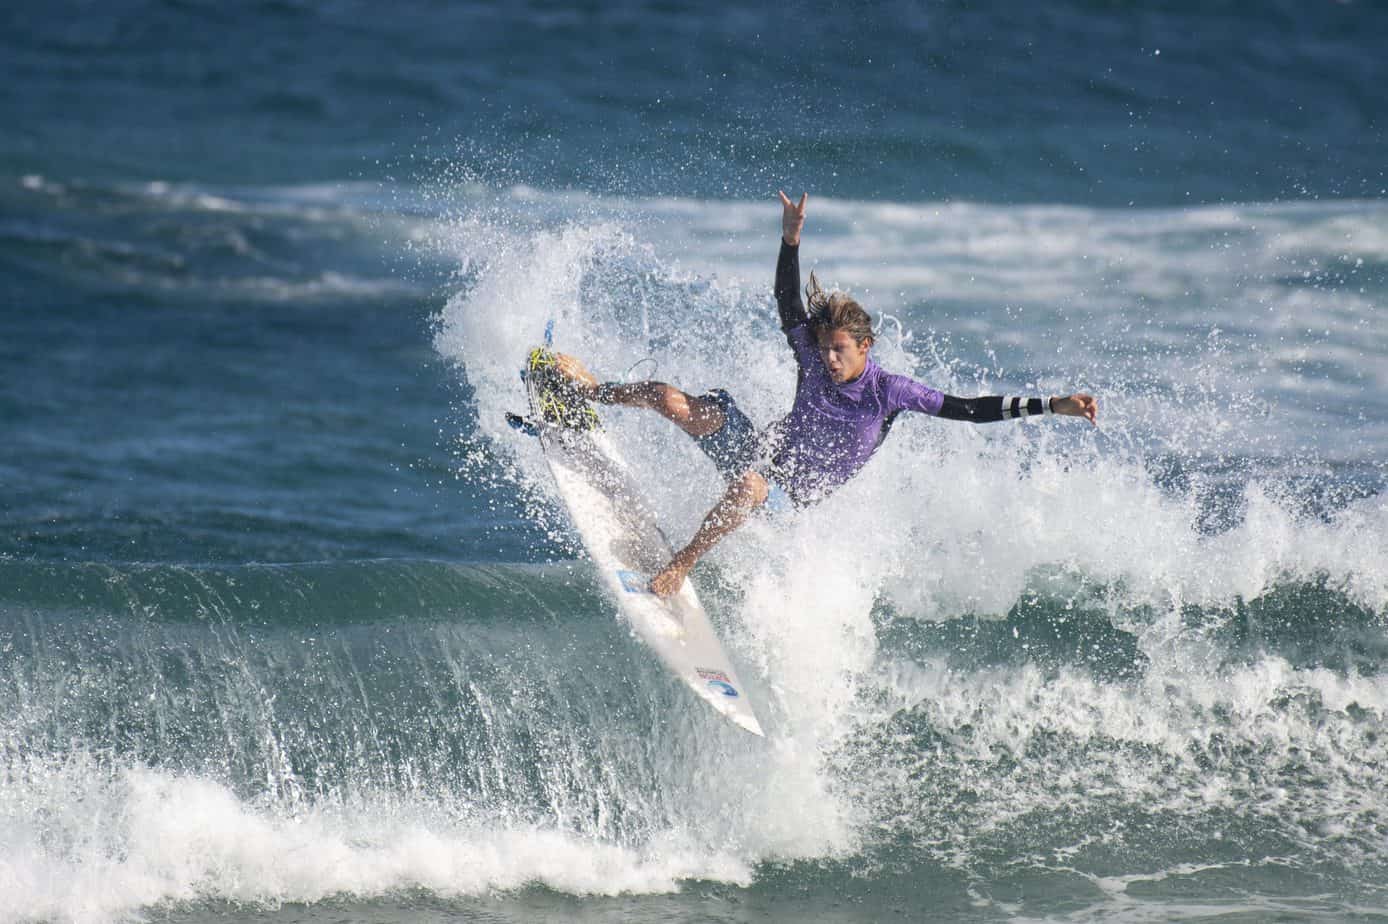 SLO CAL Open at Surf: Port Stephens Pro – World Surf League